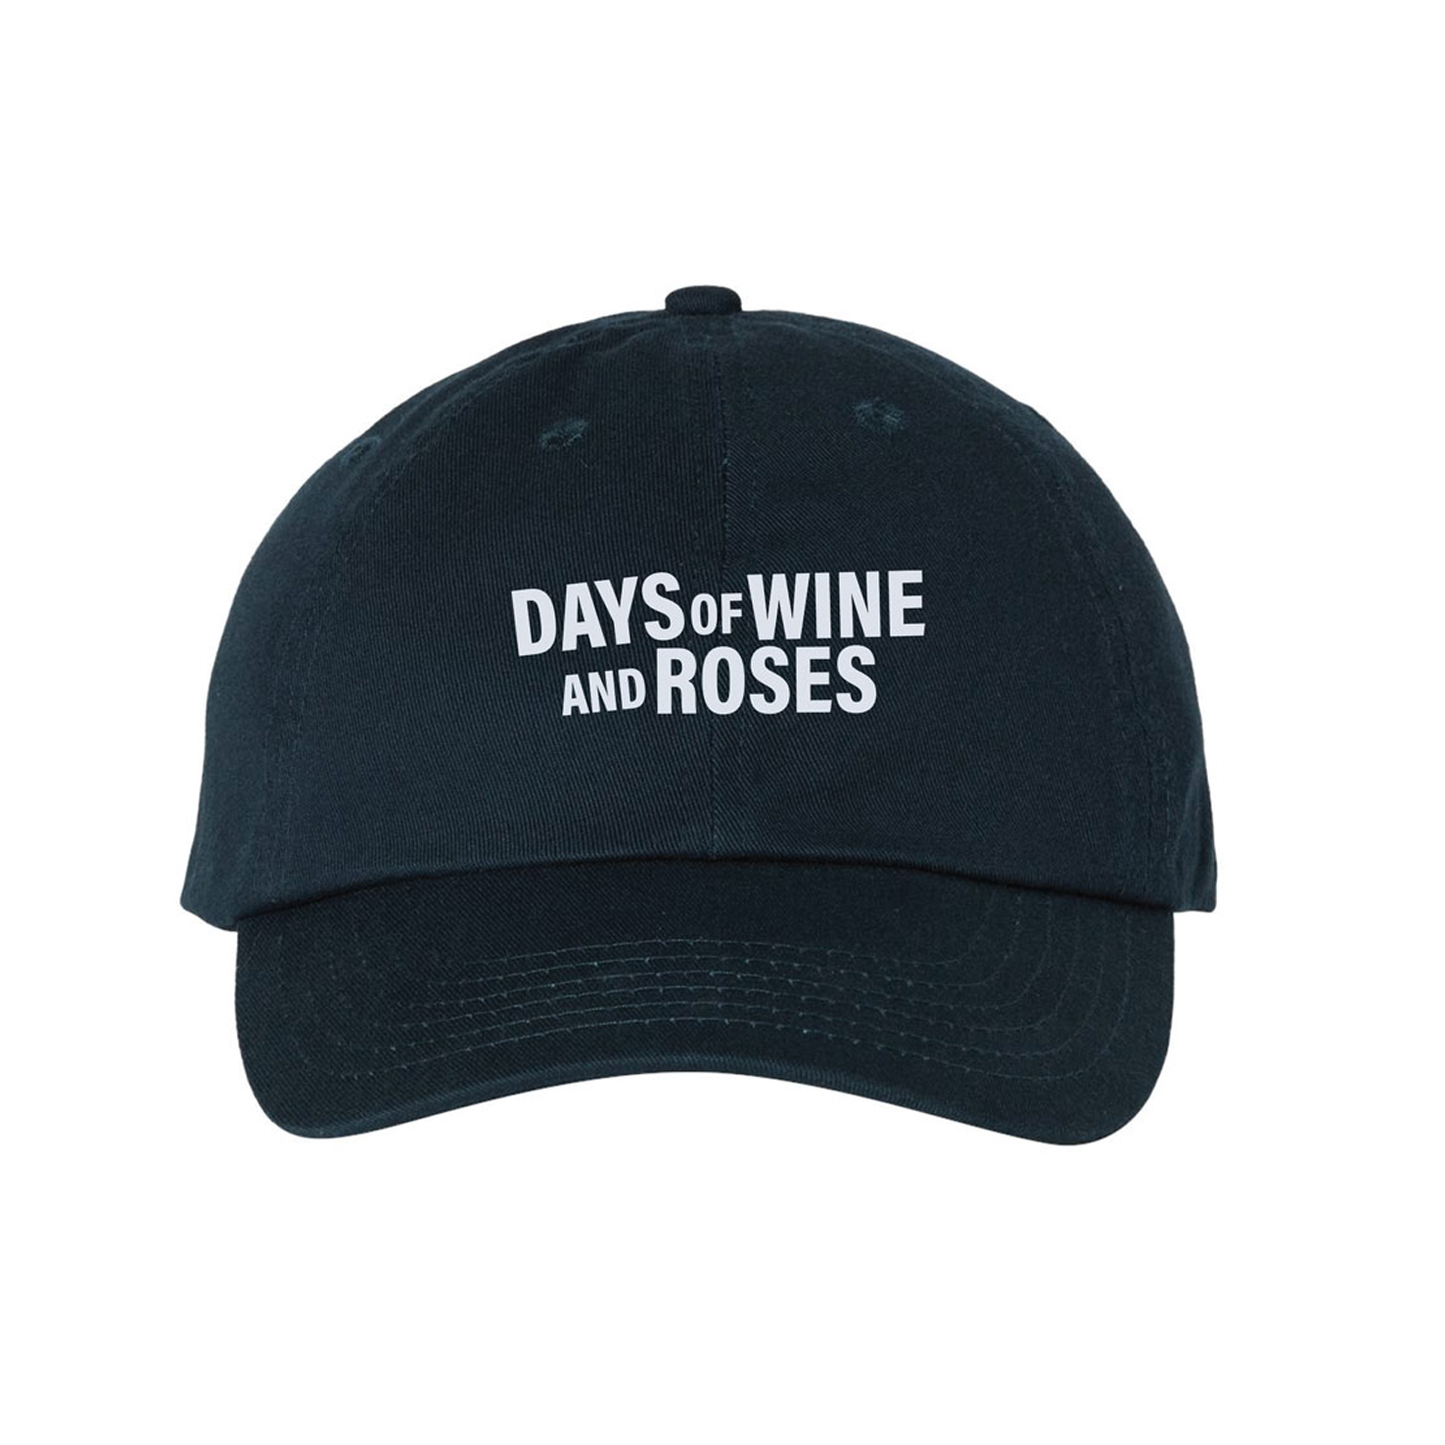 DAYS OF WINE AND ROSES Title Cap